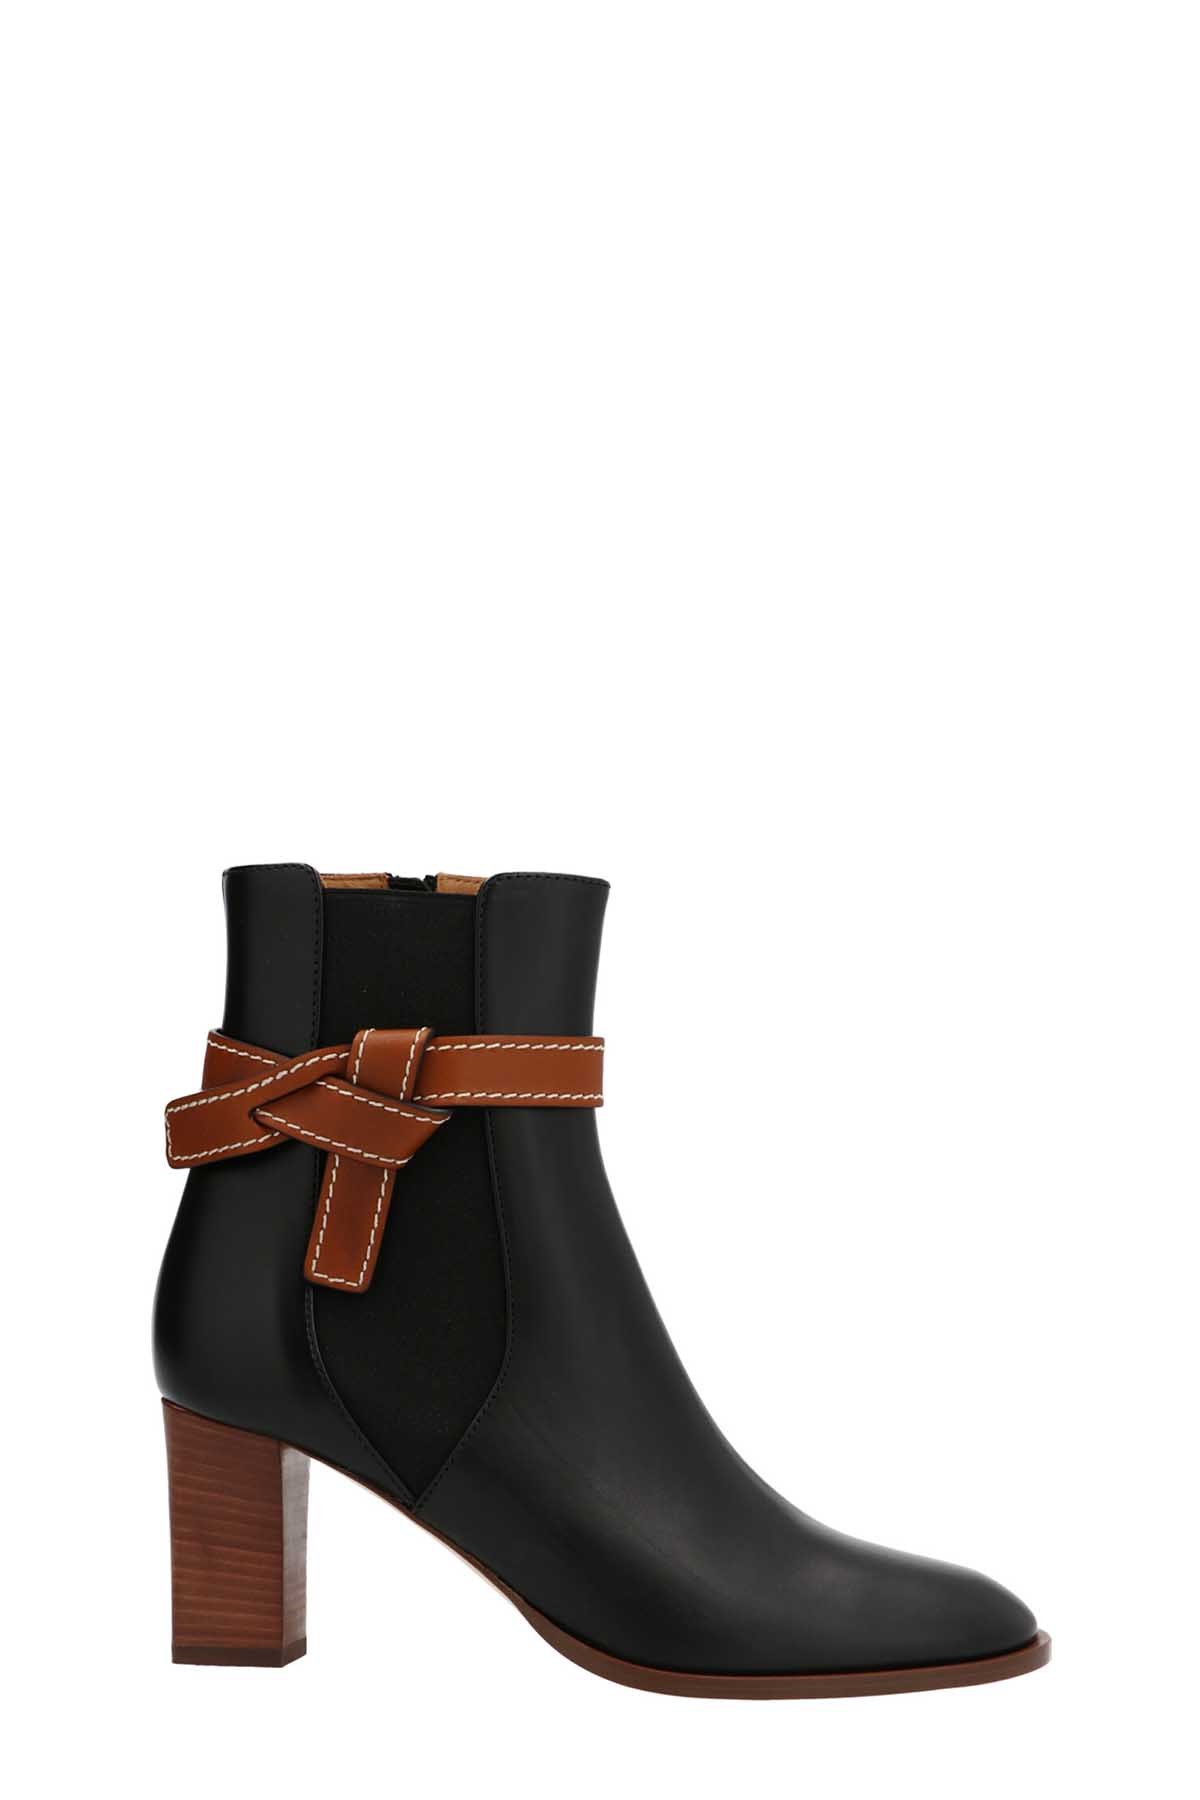 LOEWE 'Gate’ Ankle Boots